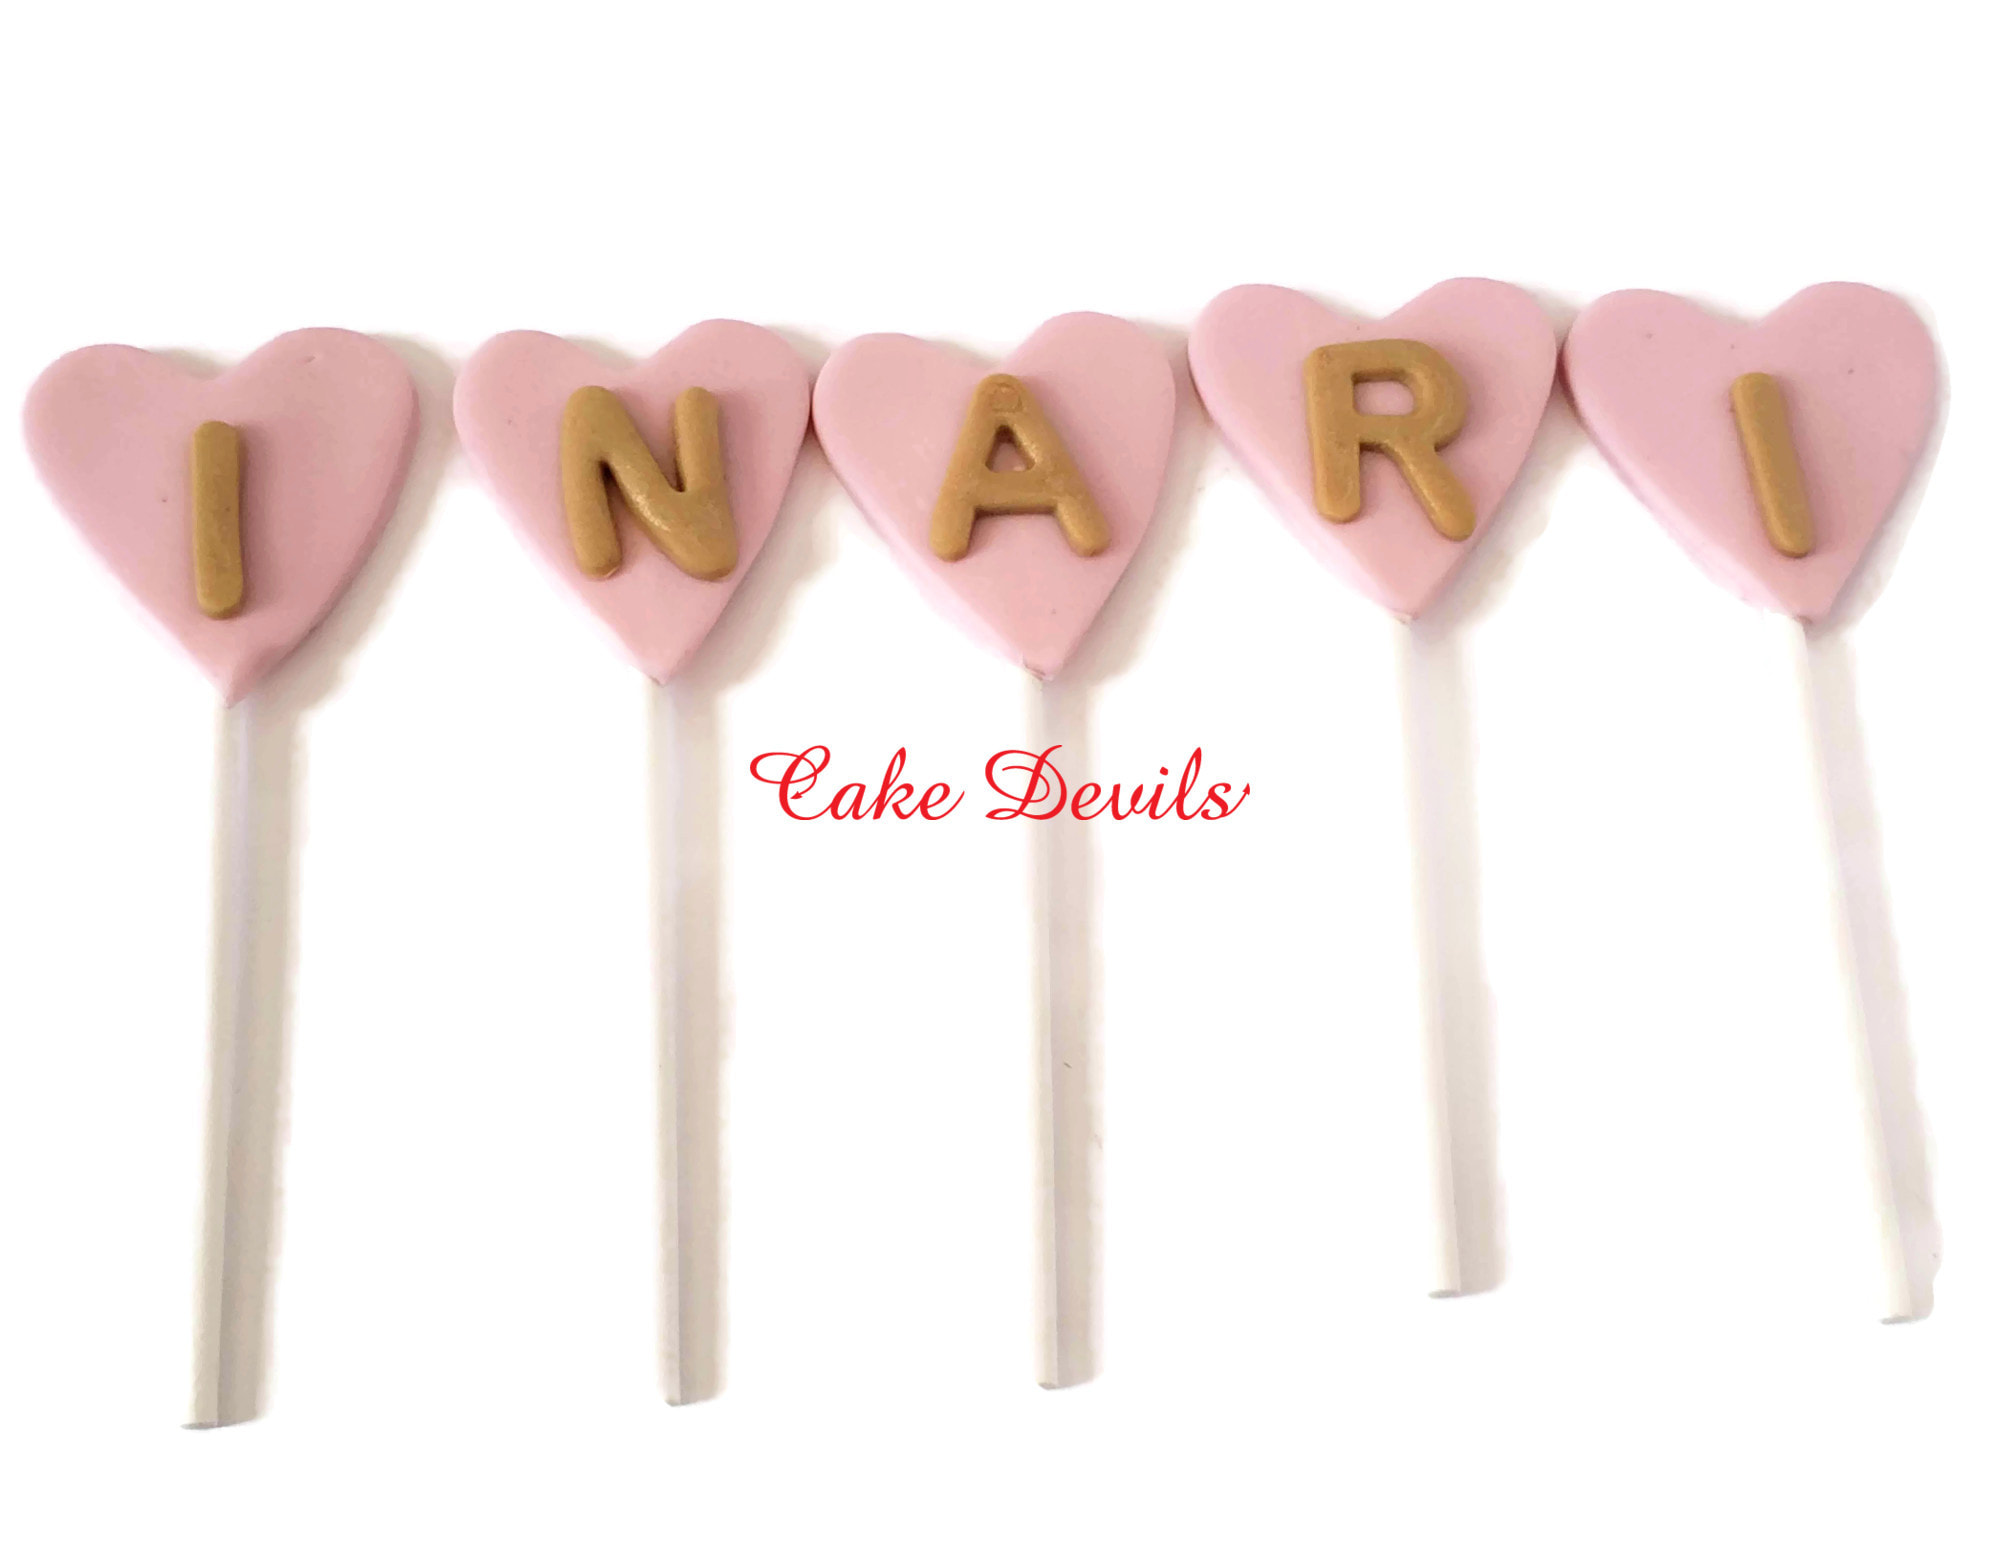 Fondant Letters in Hearts, Handmade Name Cake Decorations, Hearts on  Sticks, Lollipop Hearts Cake Decorations